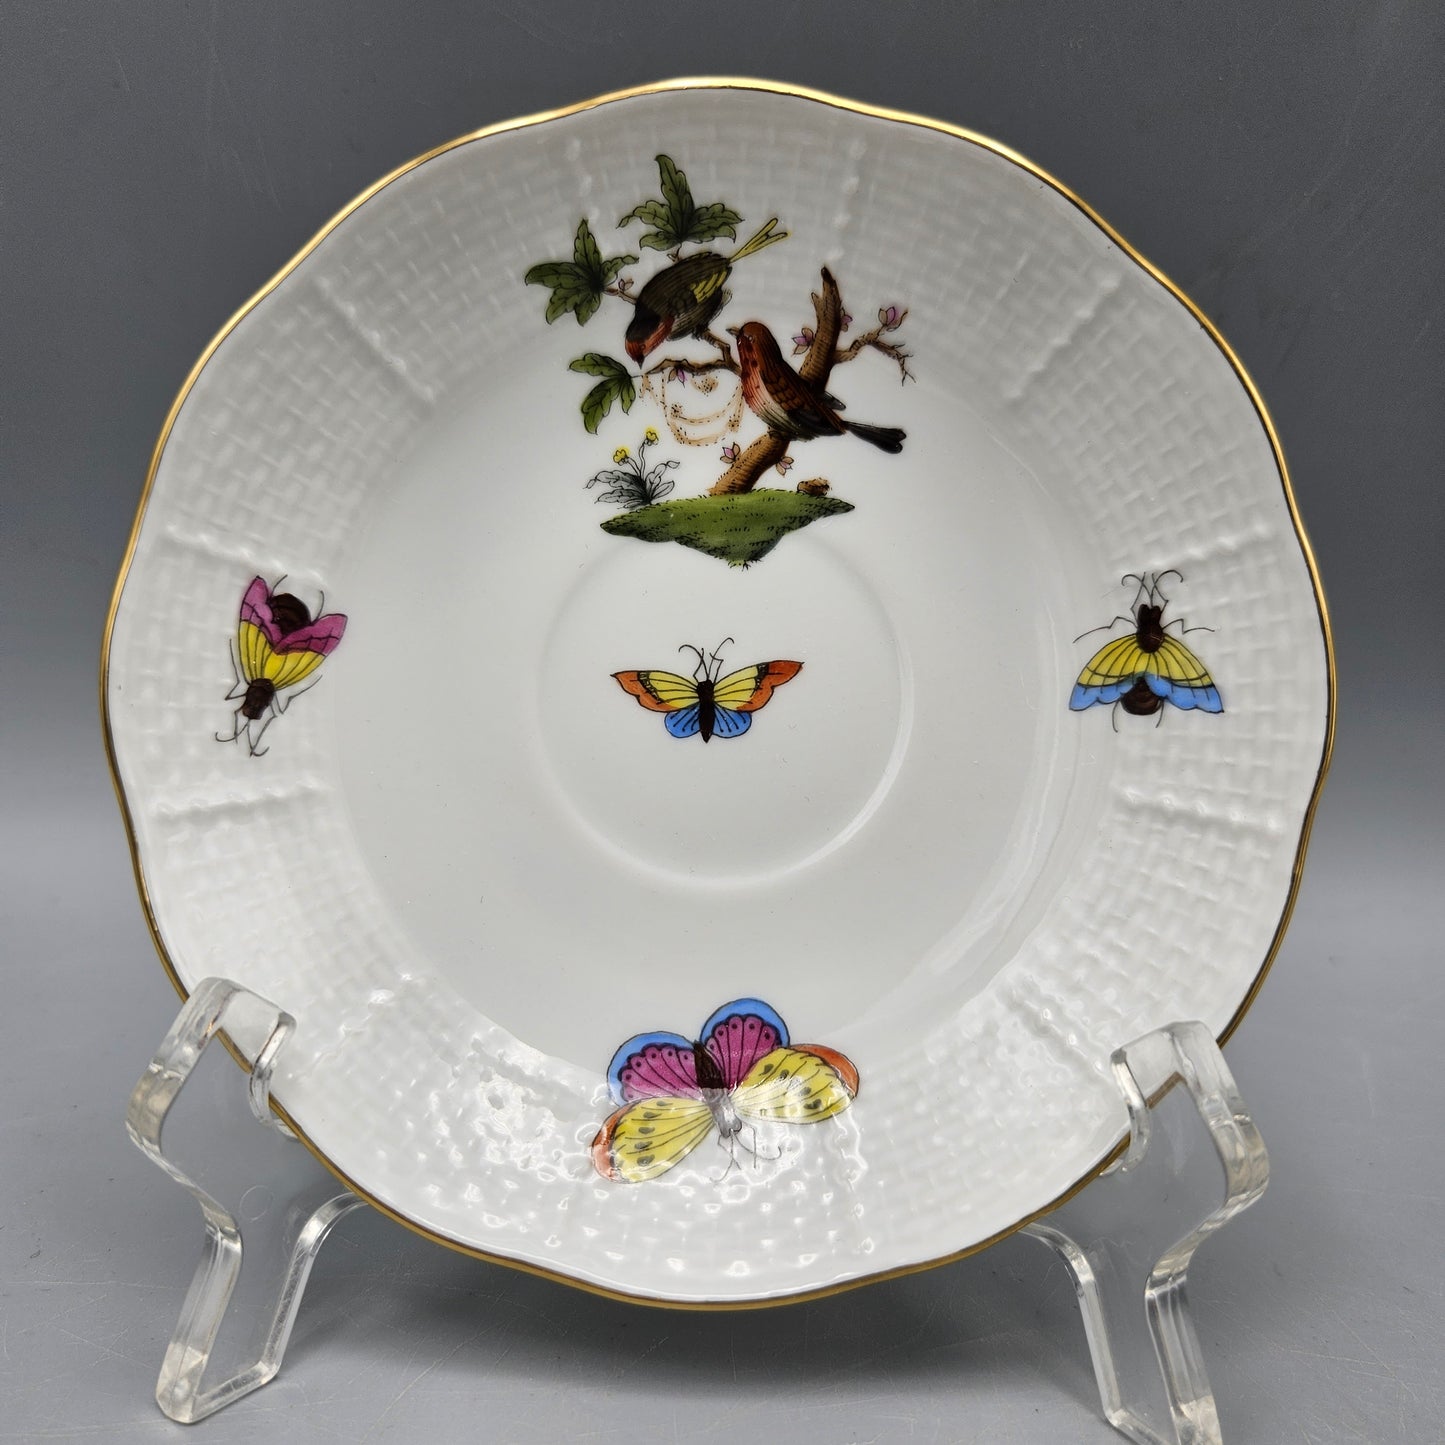 Herend Porcelain Rothschild Birds Coffee Cup & Saucer - 8 Available